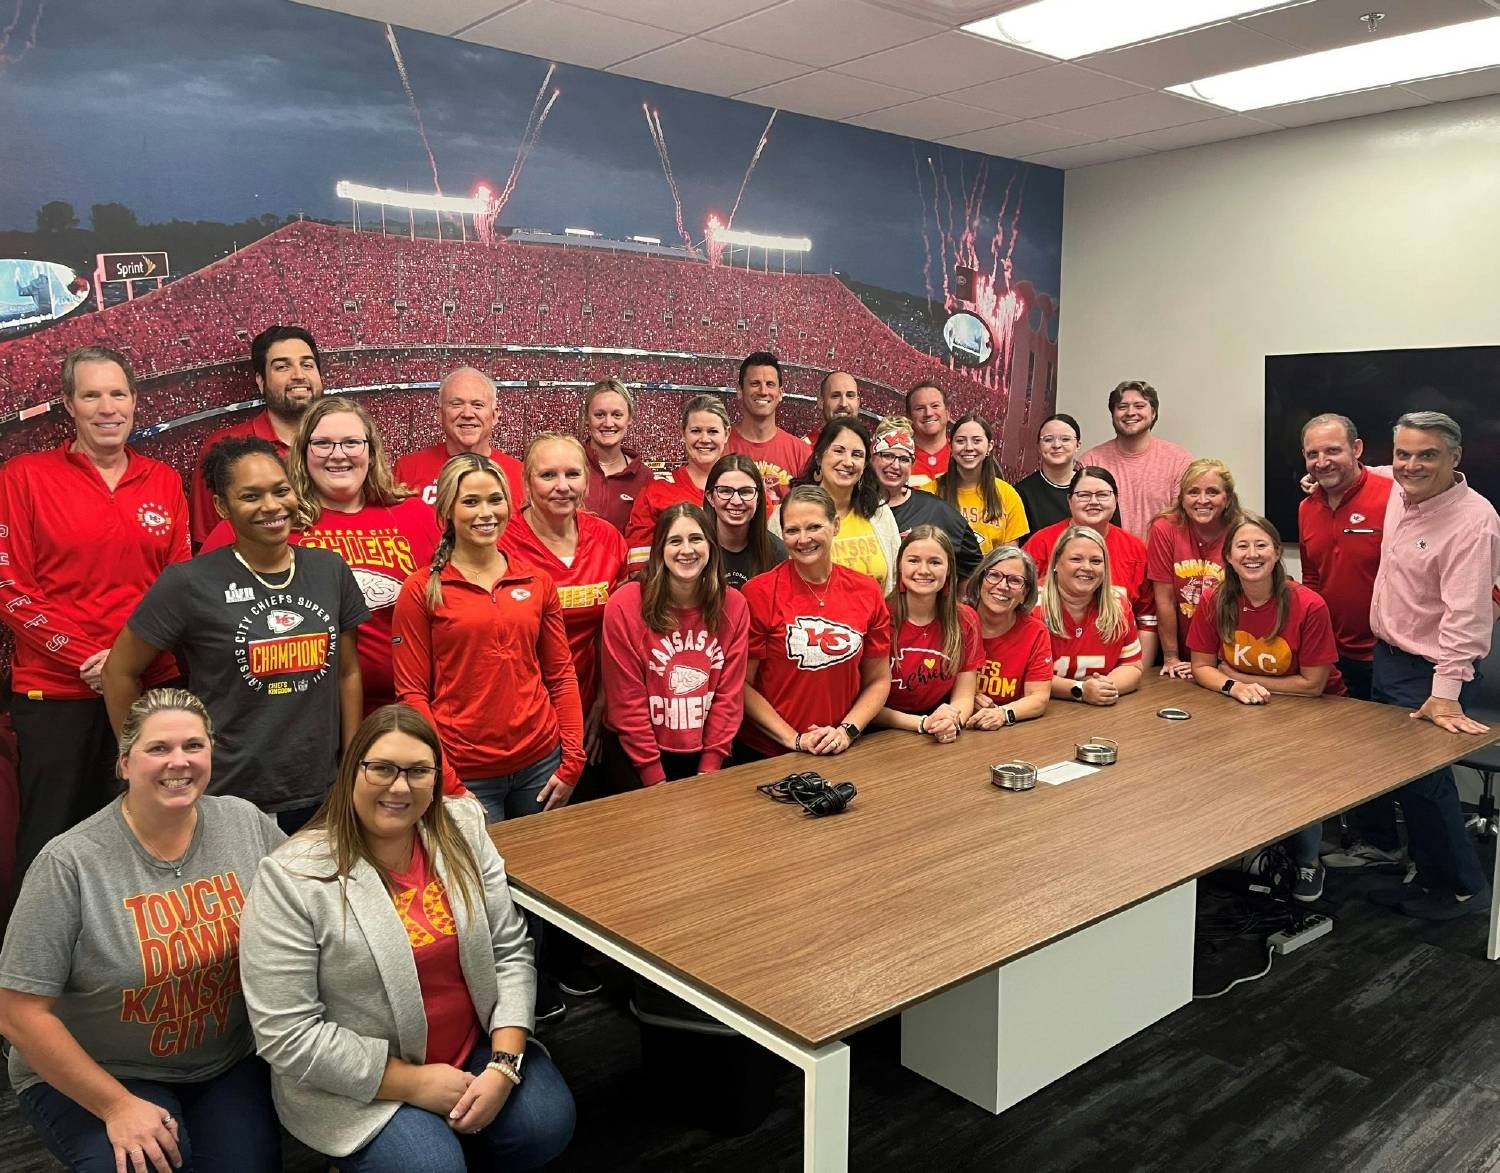 Chiefs Kingdom pride is shared among our Kansas City team.